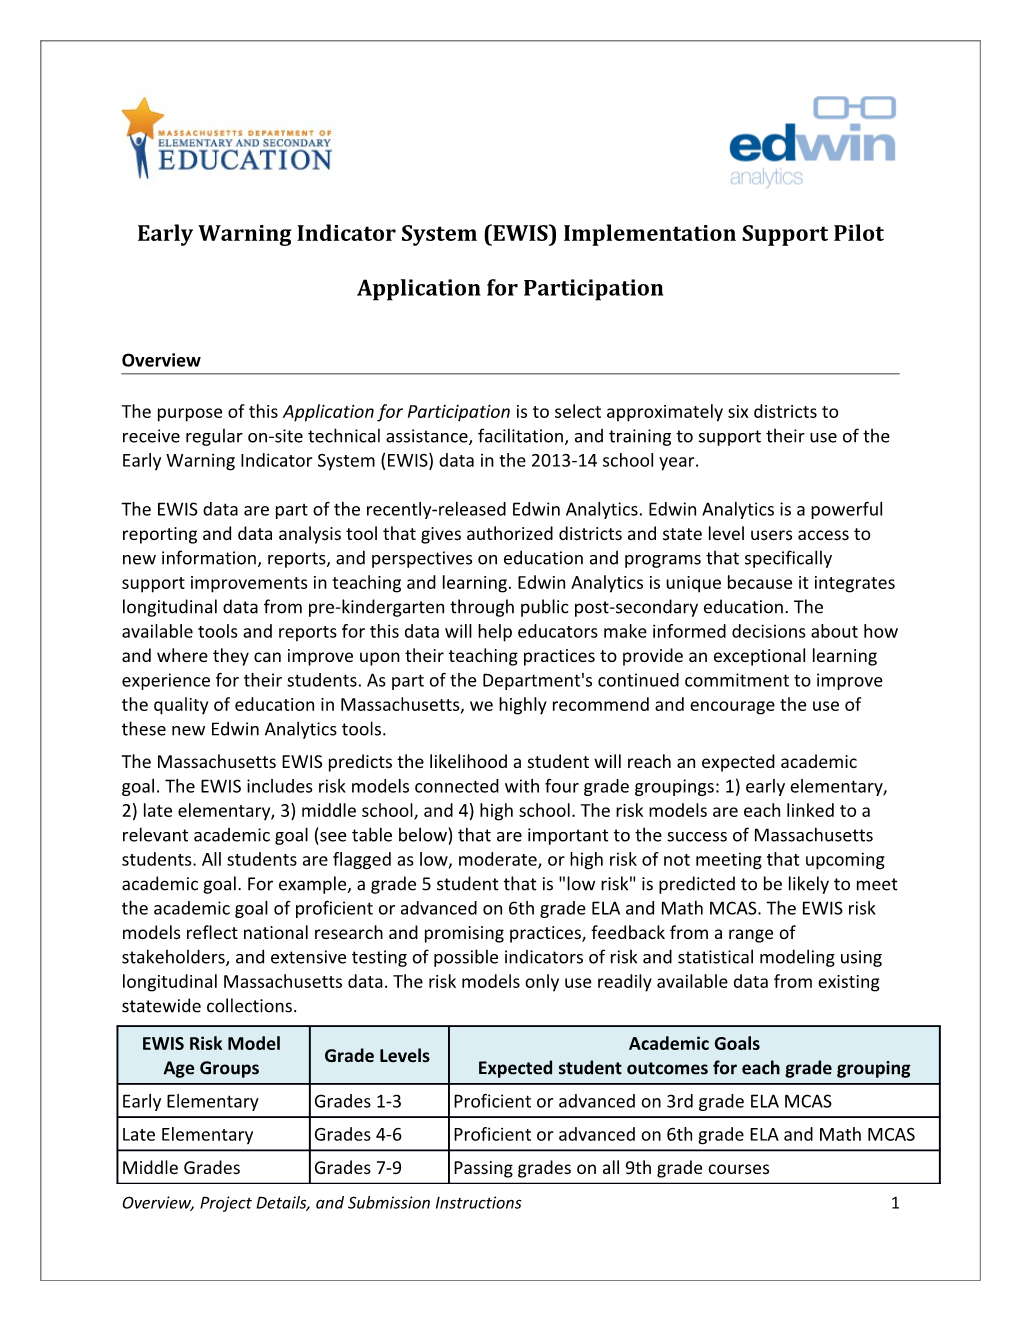 Early Warning Indicator System (EWIS) Implementation Support Pilot